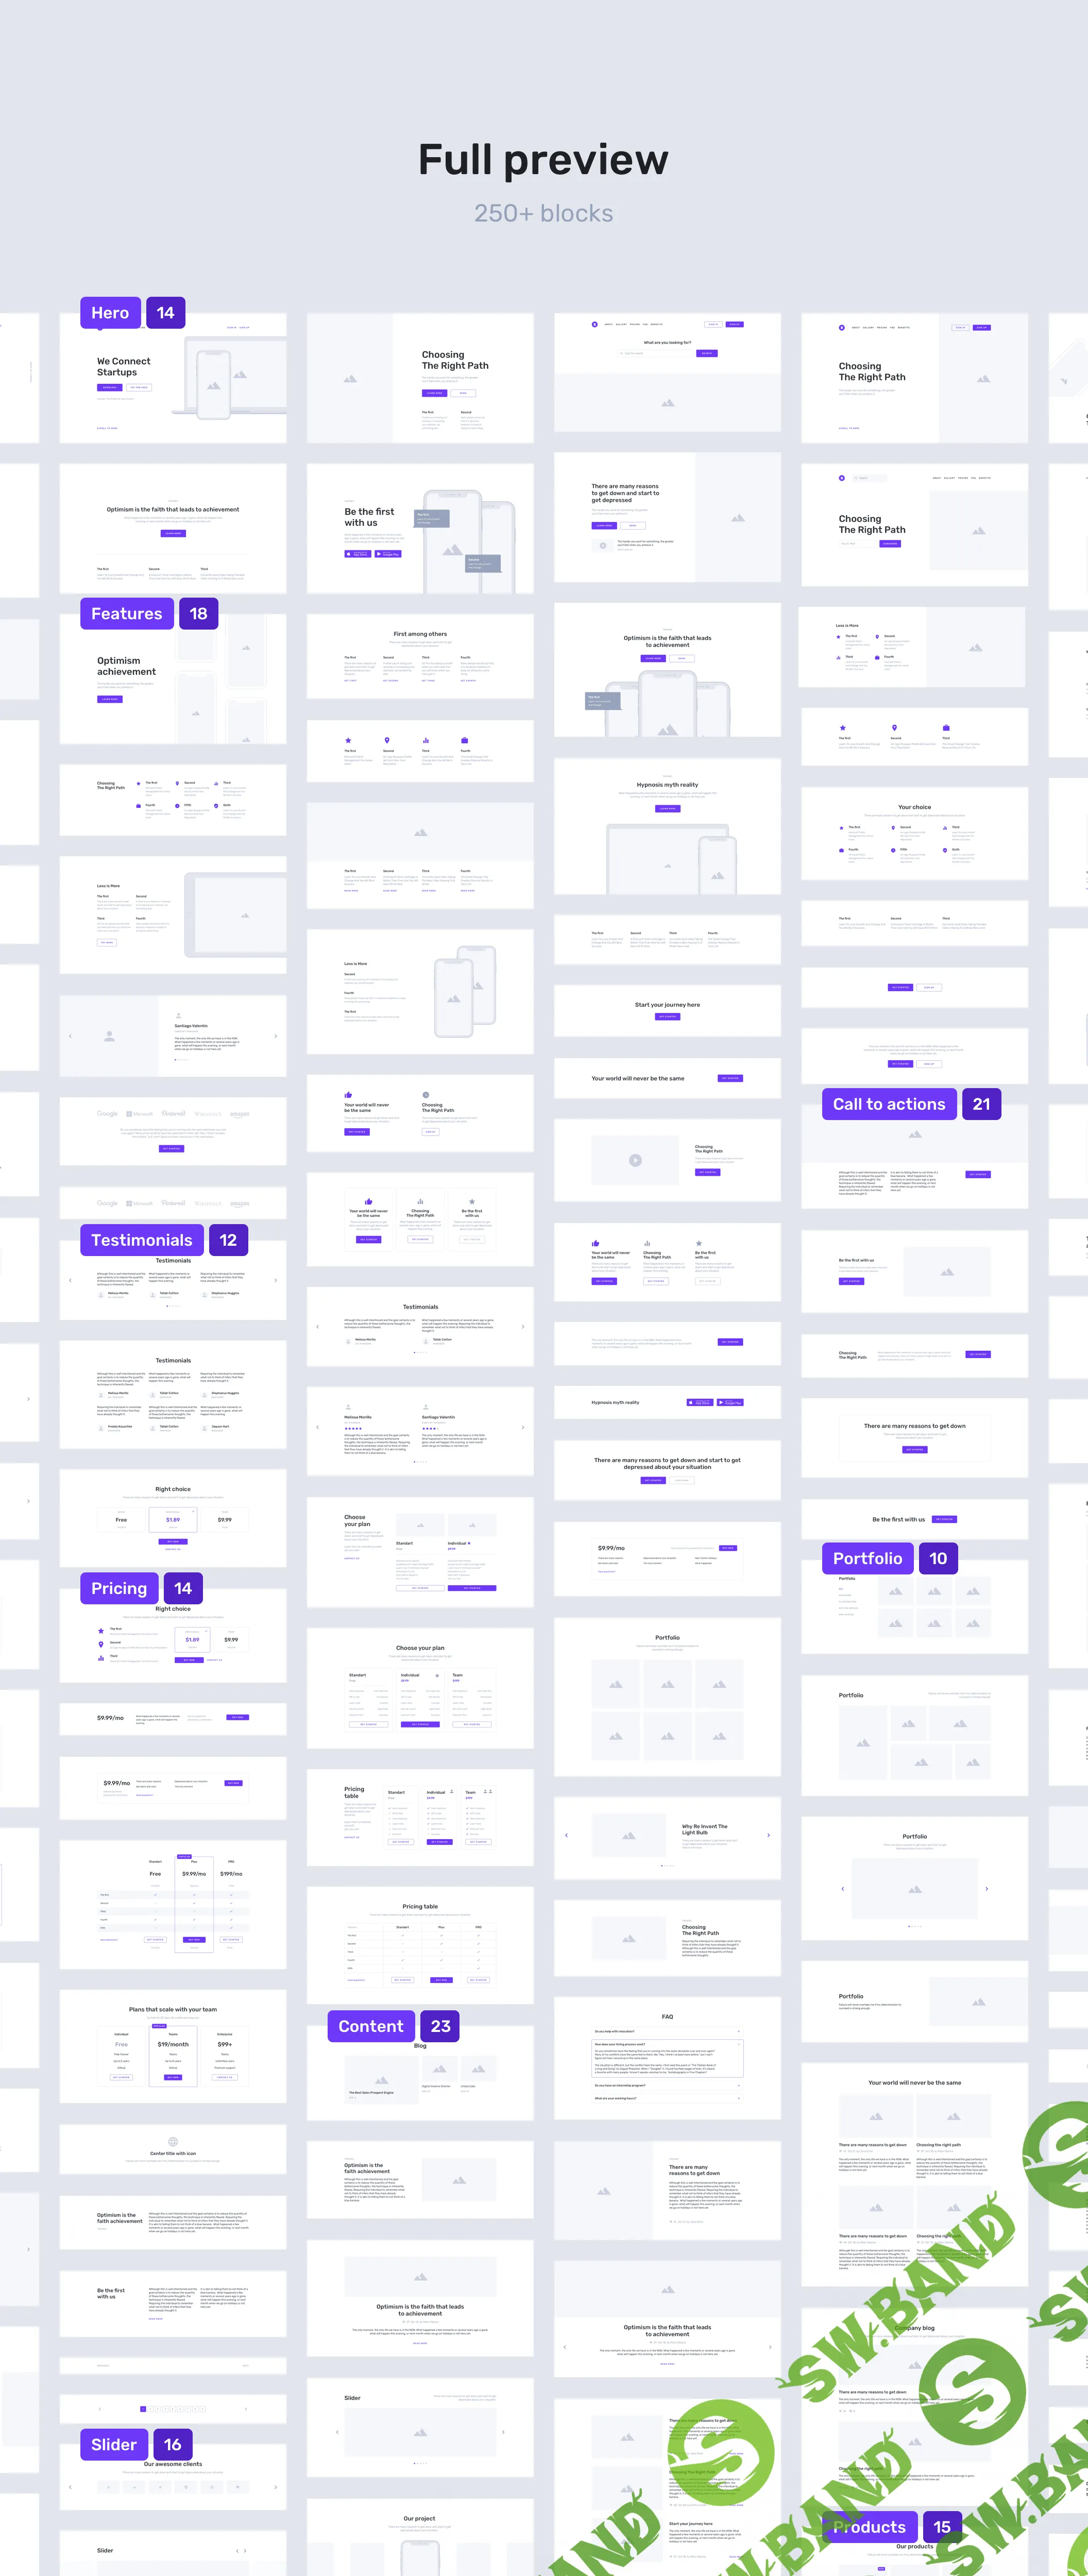 [UI8.net - Denis Abdullin] Containers Web Wireframe Kit